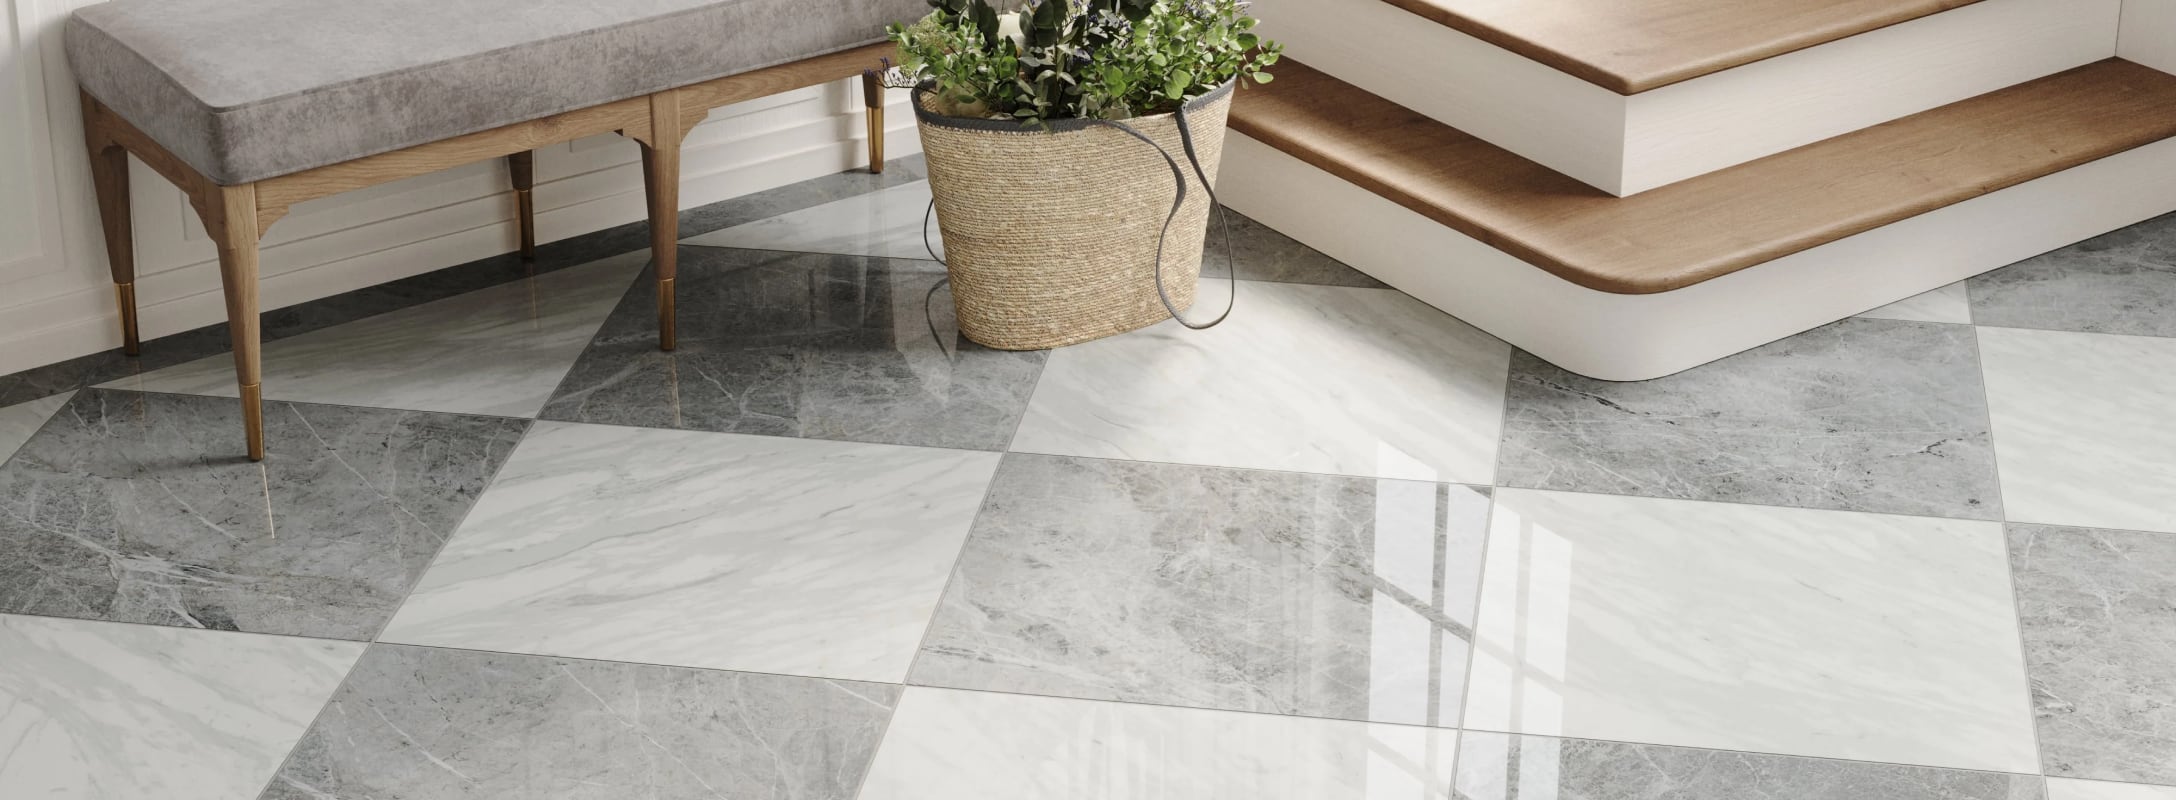 Stone Look Porcelain Floor Tile adds elegance with a checked design, enriching luxurious spaces with timeless charm.